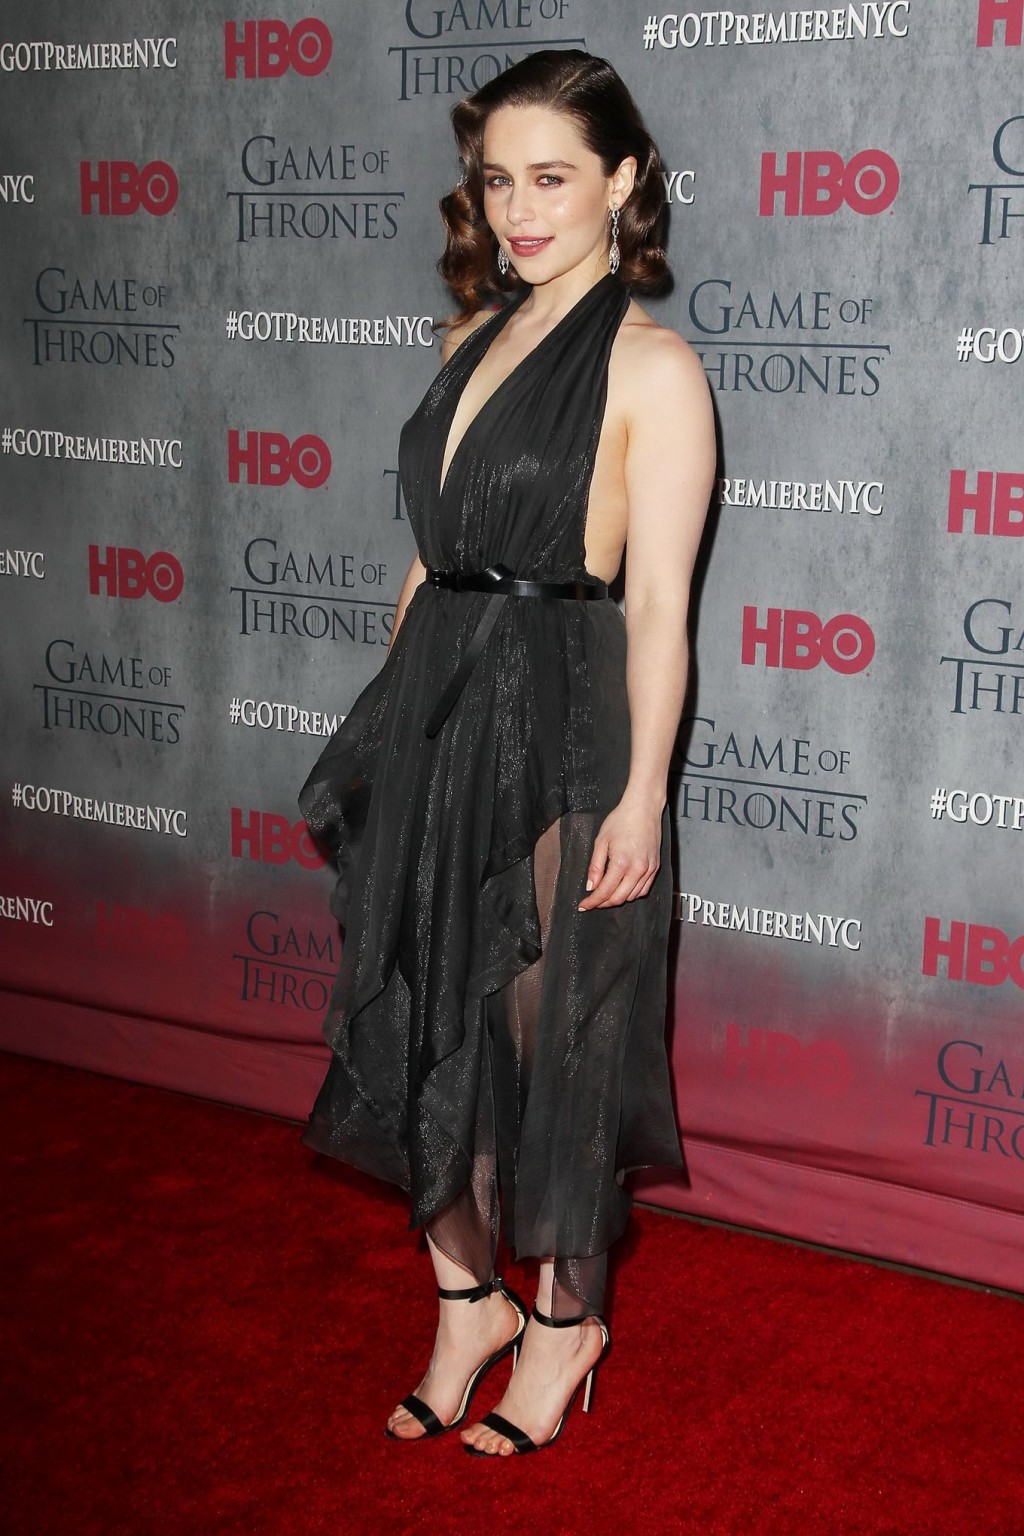 Emilia Clarke braless wearing black partially see-through dress at the Game of T #75201498